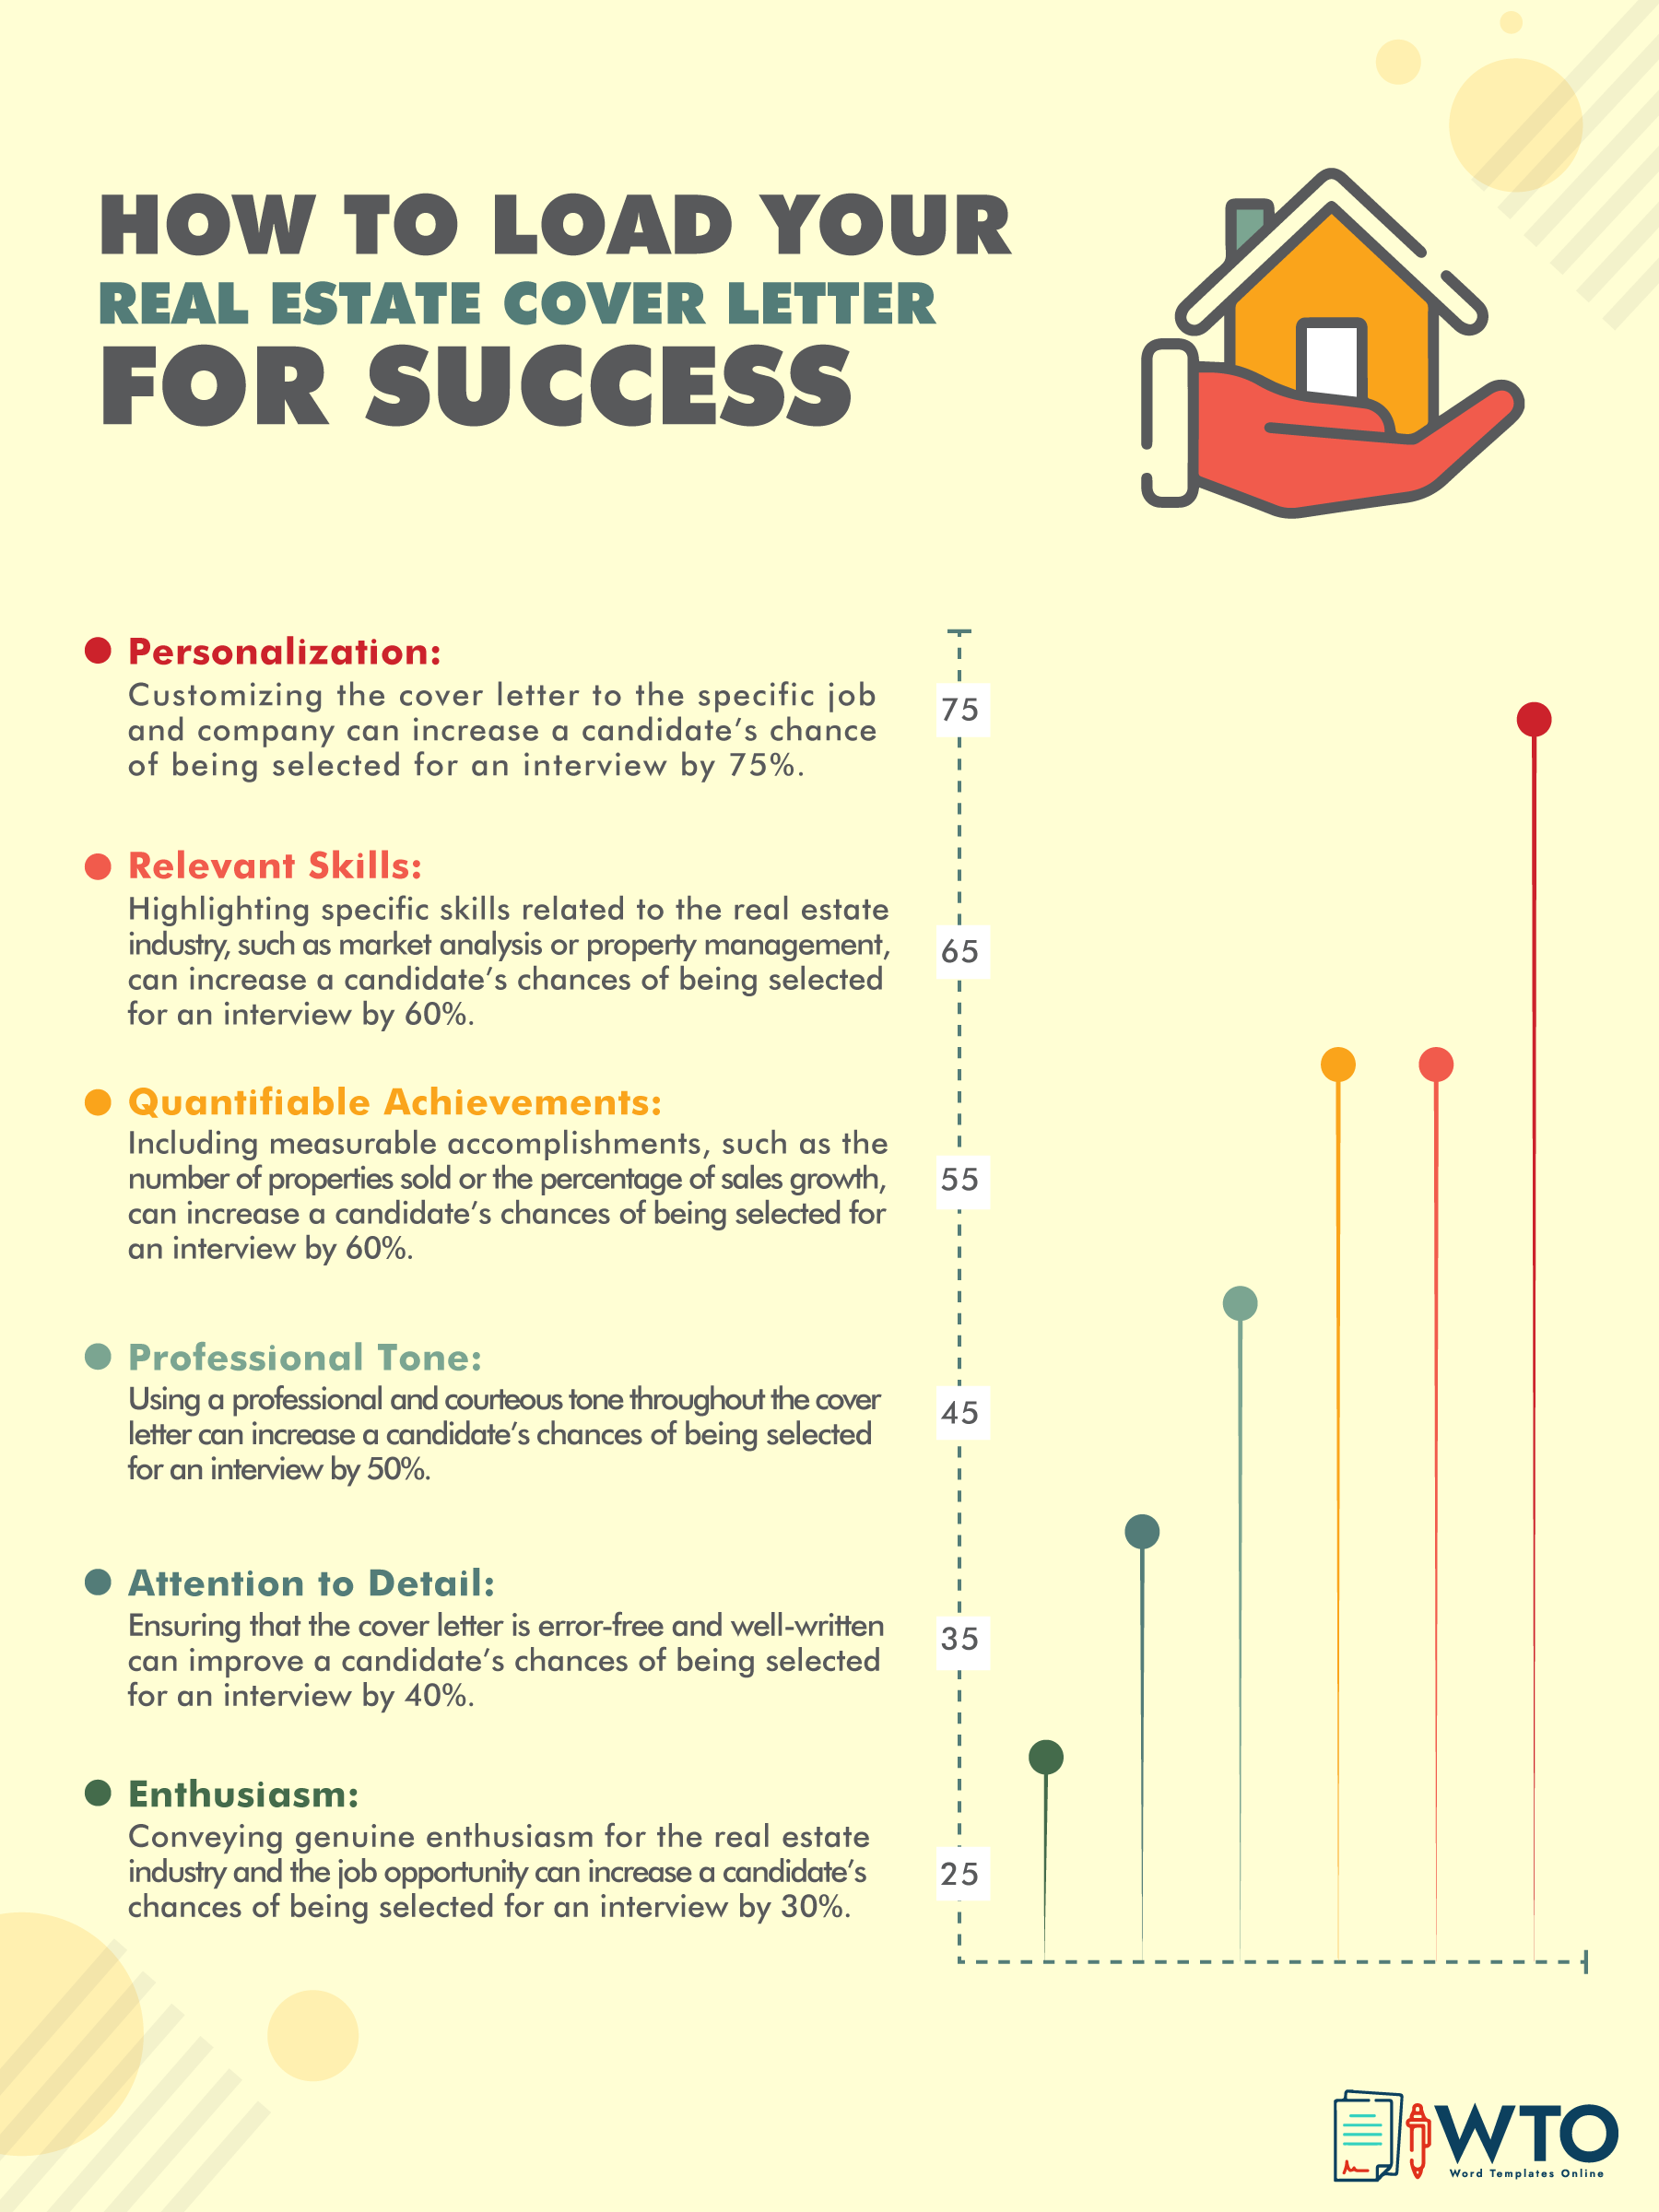 This infographic is about how to write a successful Real Estate Cover Letter.